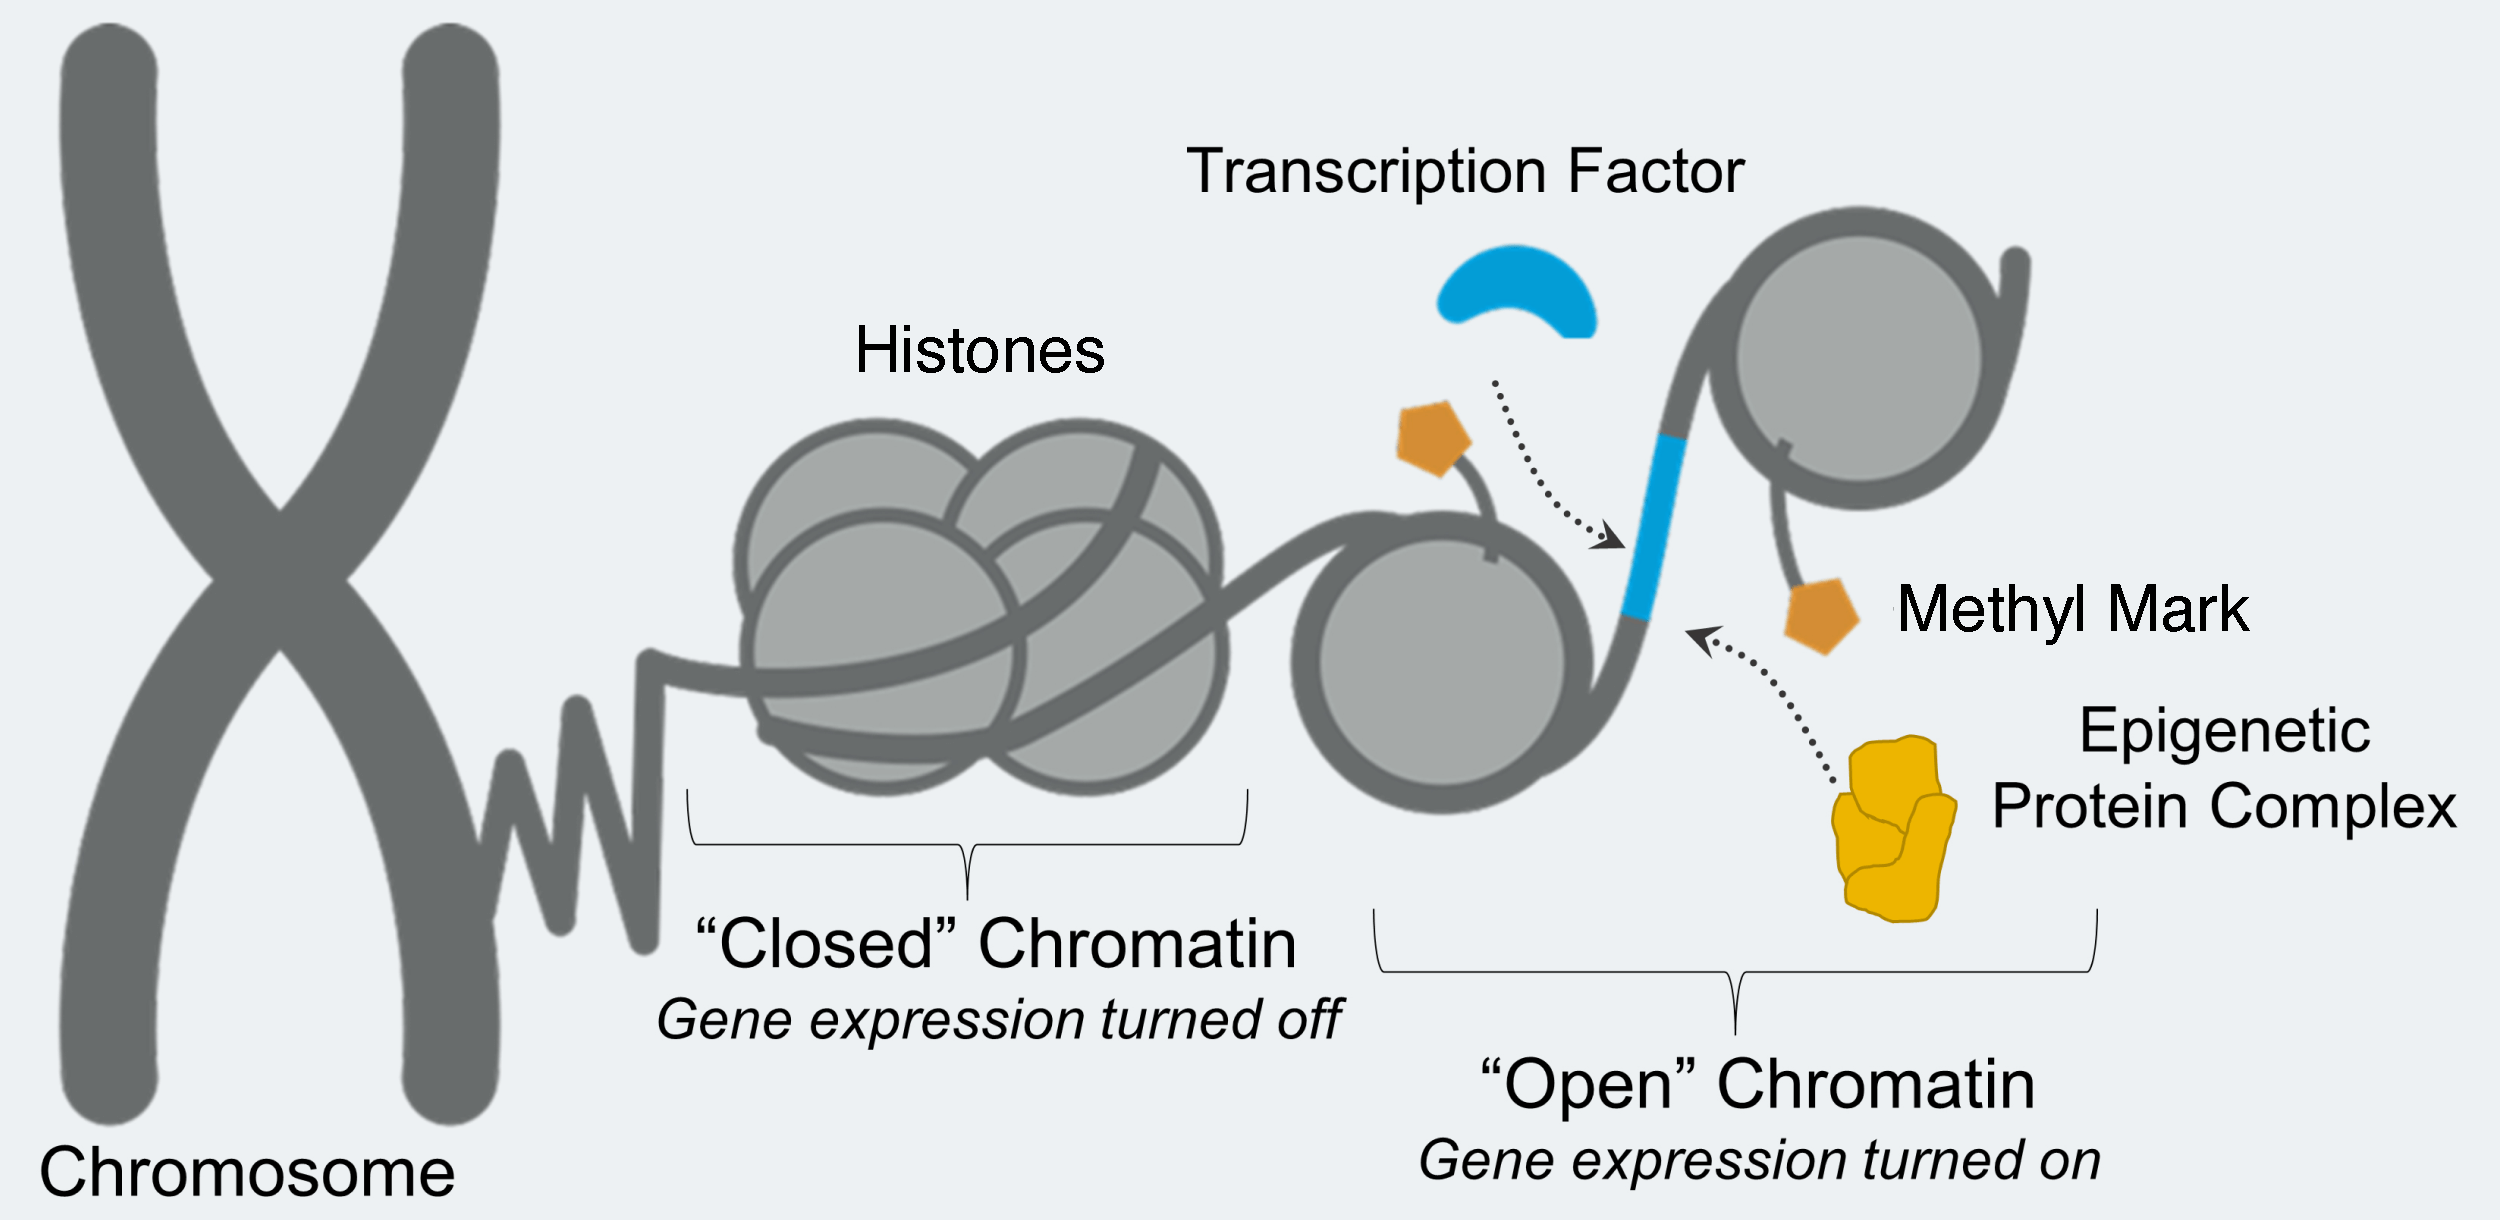 Gene expression is a dynamic process involving transcription factors binding to recognizable DNA sequences and interacting with epigenetic protein complexes to change chromatin to an open or closed state and influence gene expression.